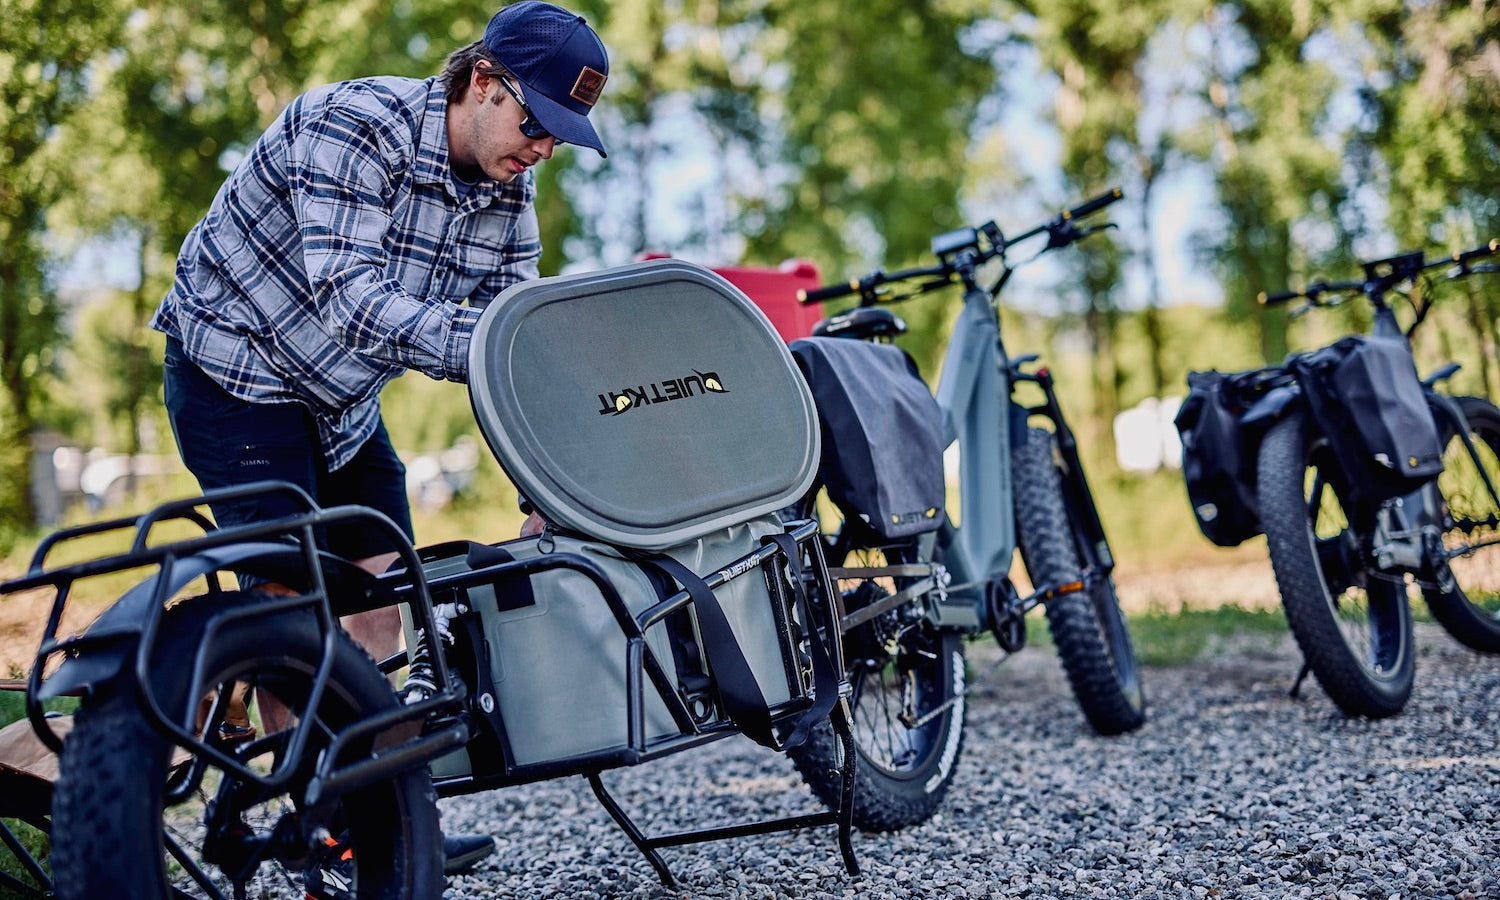 Multi-Point Kickstand | Provides added stability for loading whether you're connected to a bike or not.